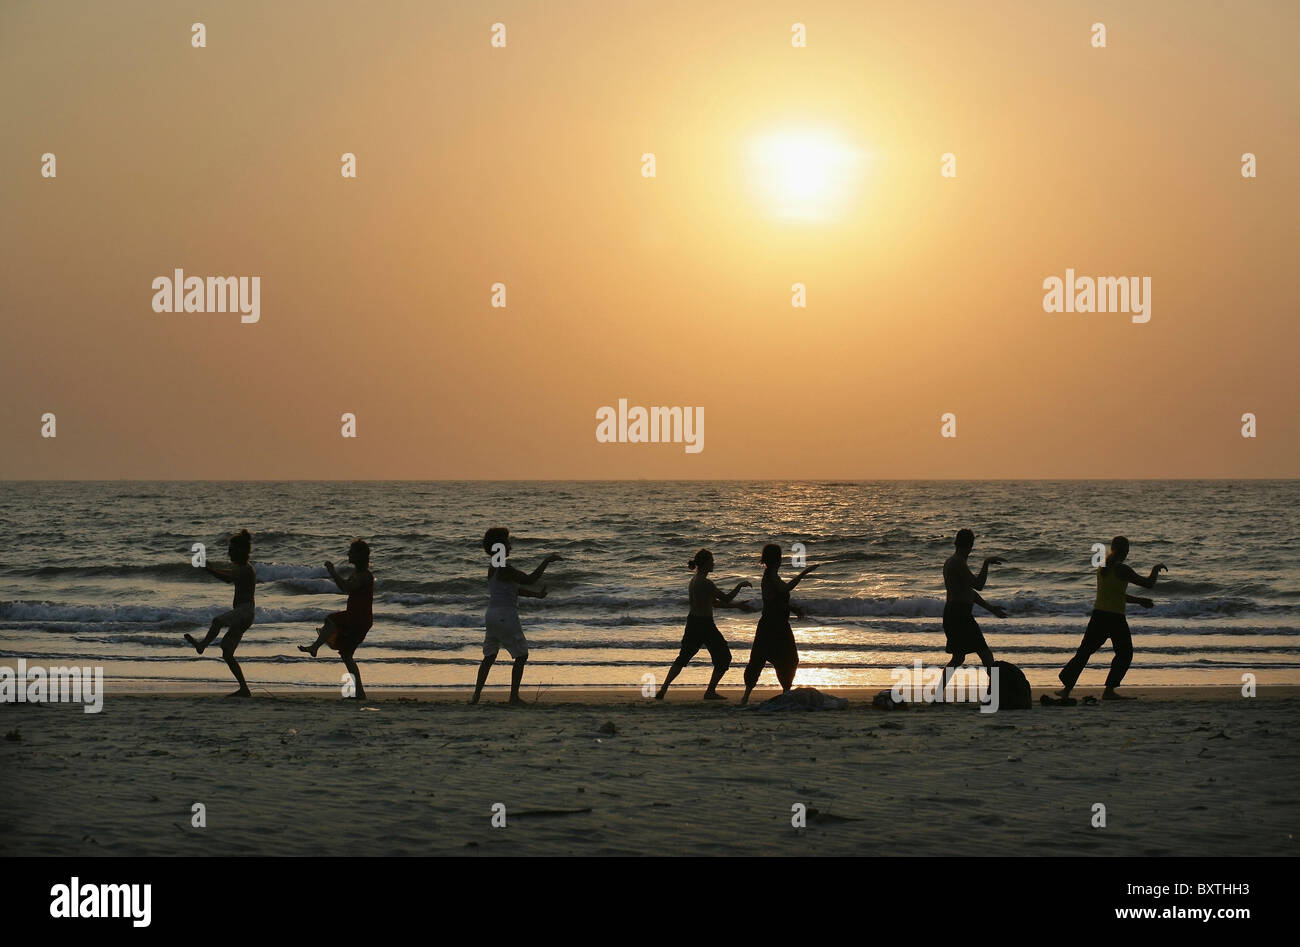 Silhouettes Of People Doing Tai Chi By The Sea On The Beach At Sunset Stock Photo